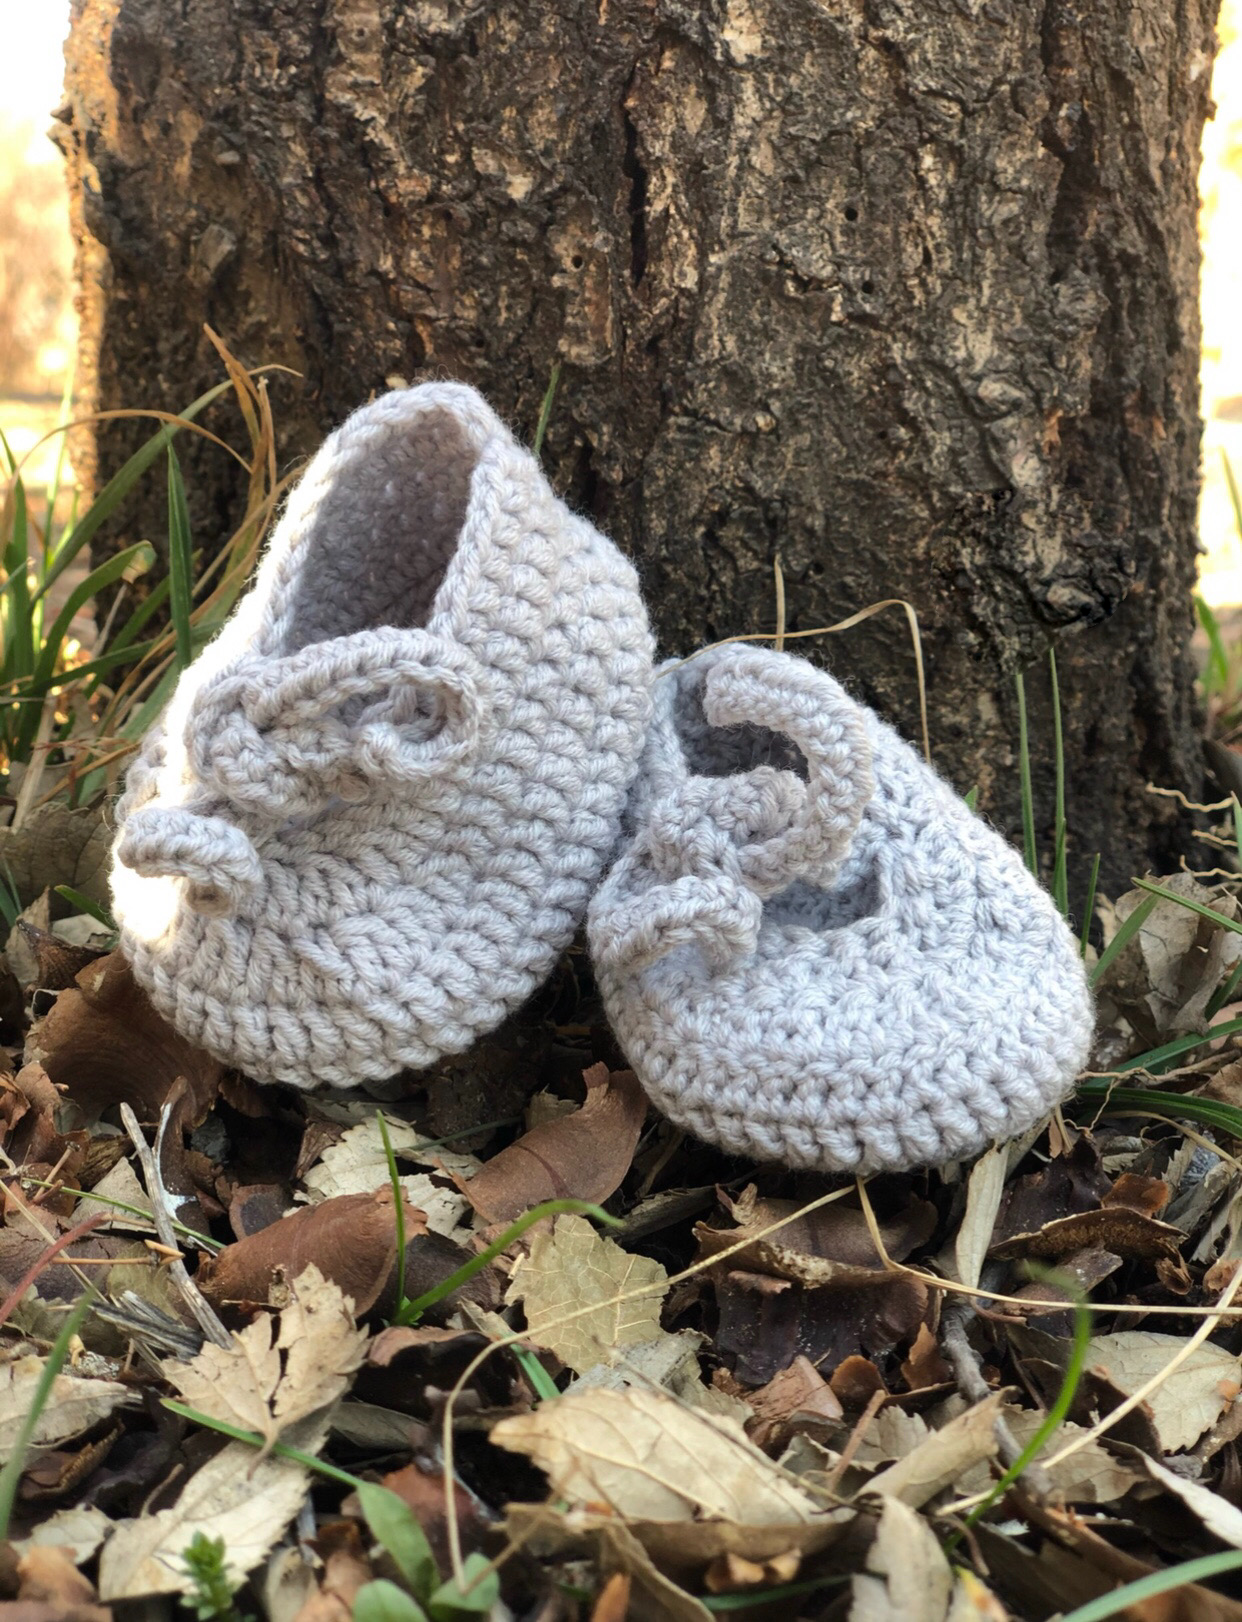 Baby knitted booties